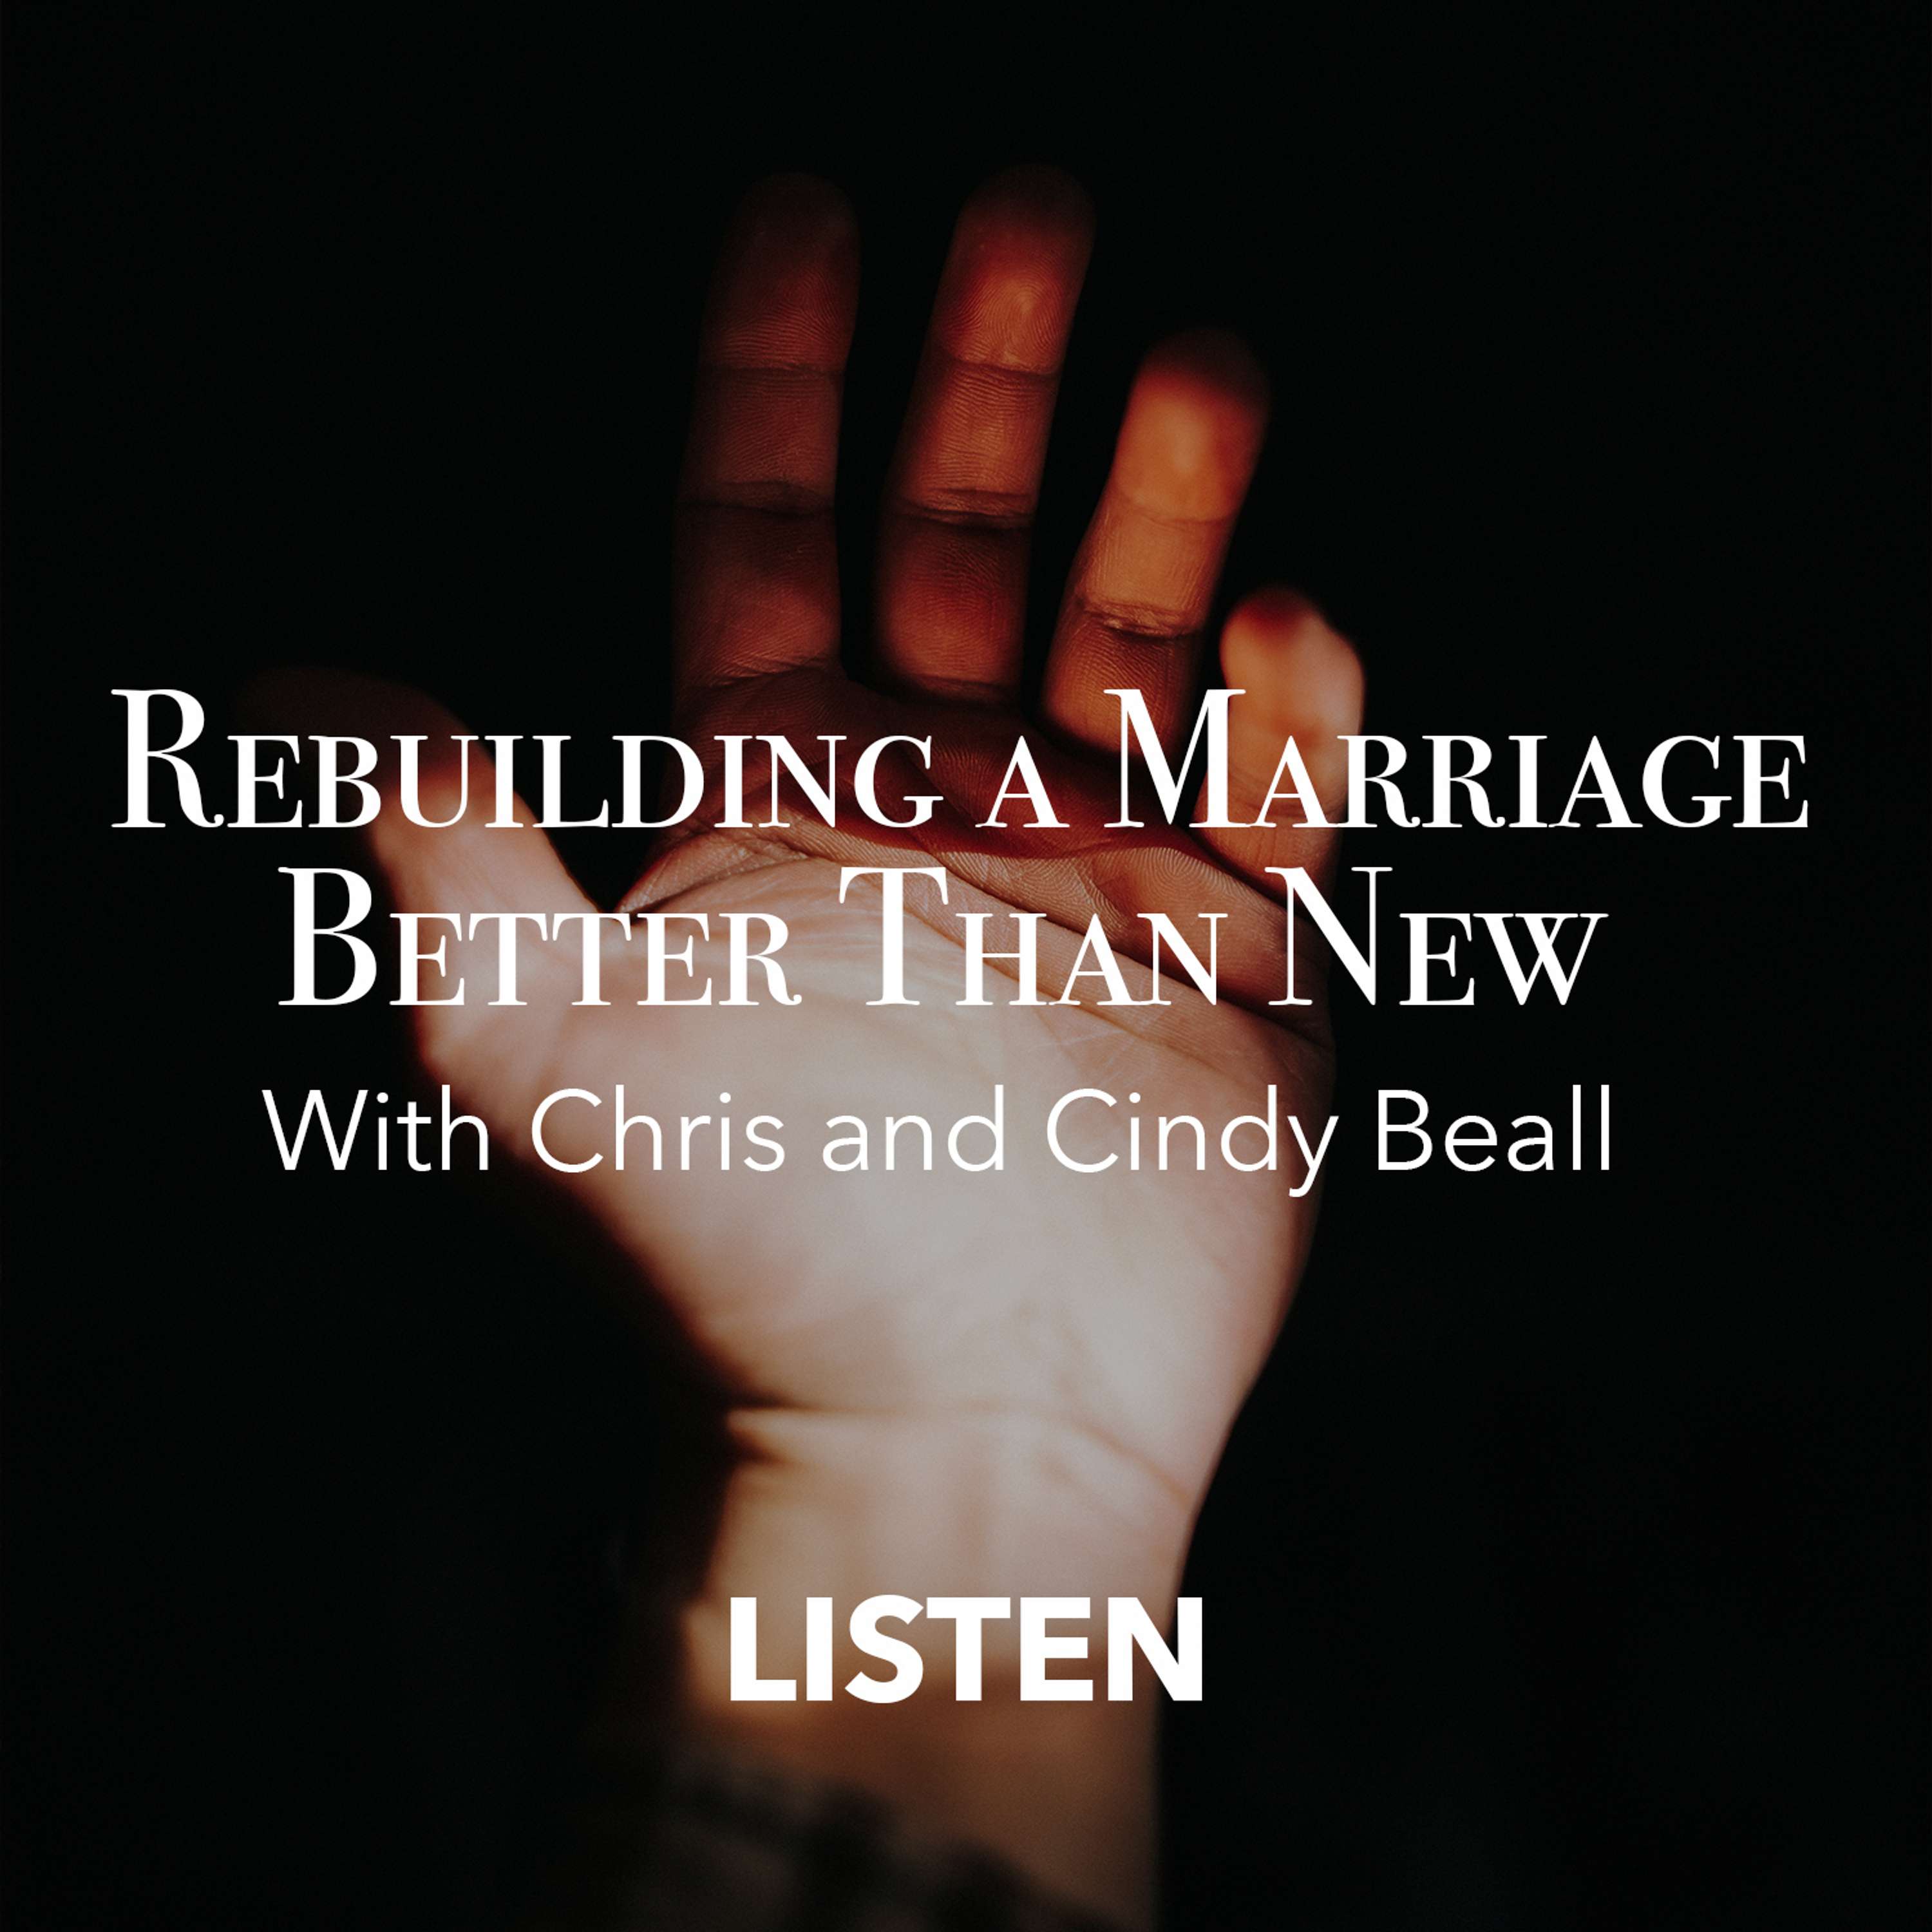 Rebuilding a Marriage Better Than New (Part 3) - Chris and Cindy Beall